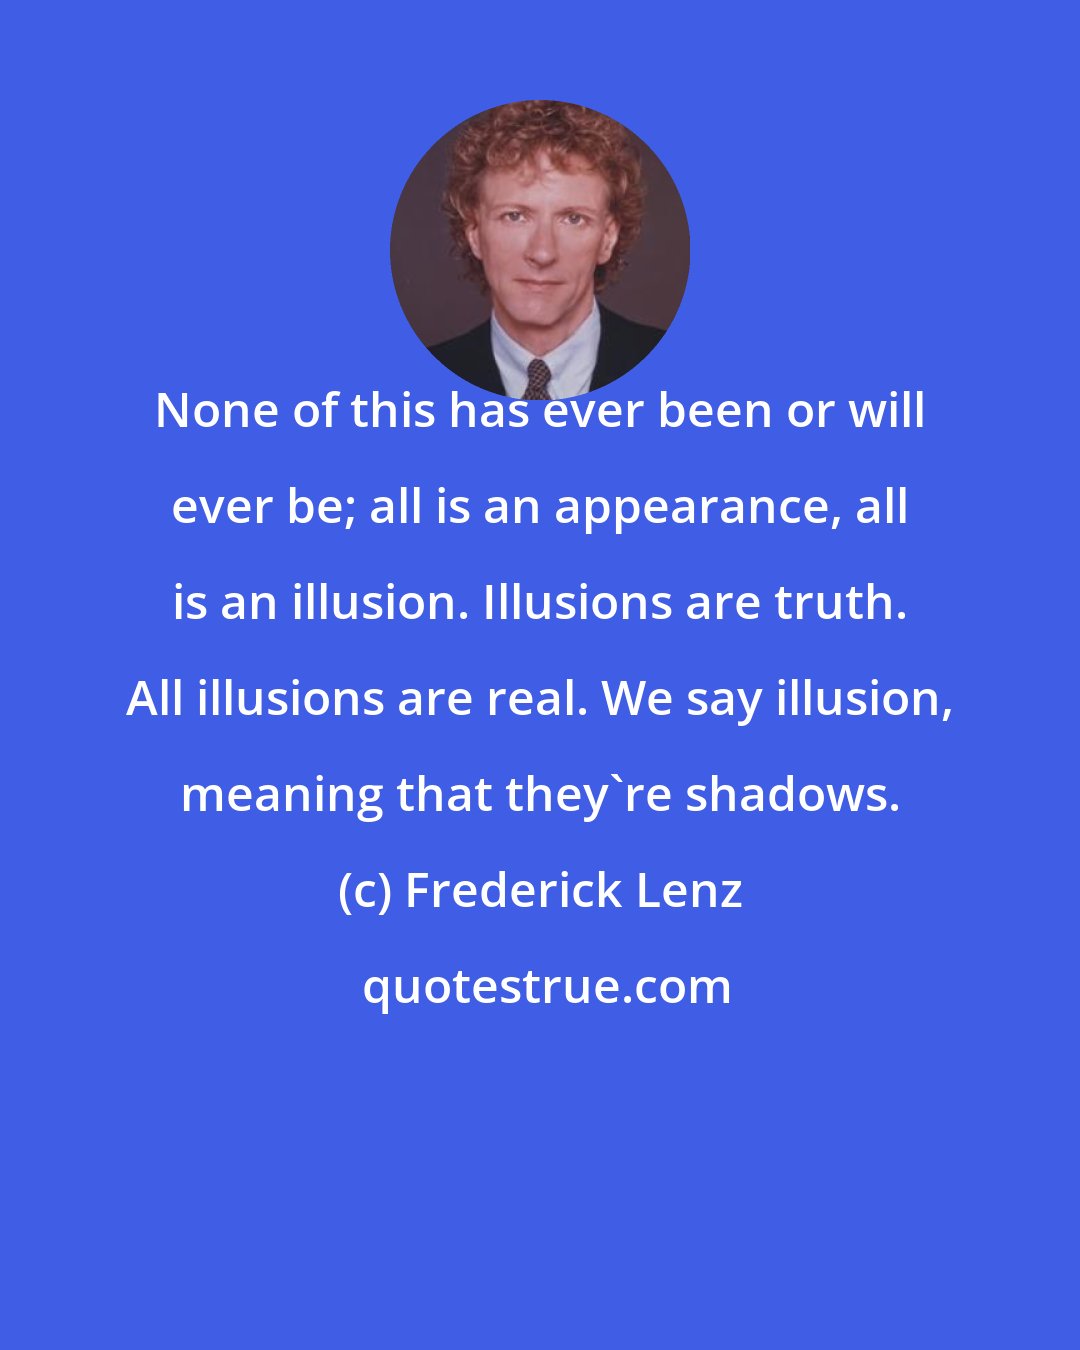 Frederick Lenz: None of this has ever been or will ever be; all is an appearance, all is an illusion. Illusions are truth. All illusions are real. We say illusion, meaning that they're shadows.